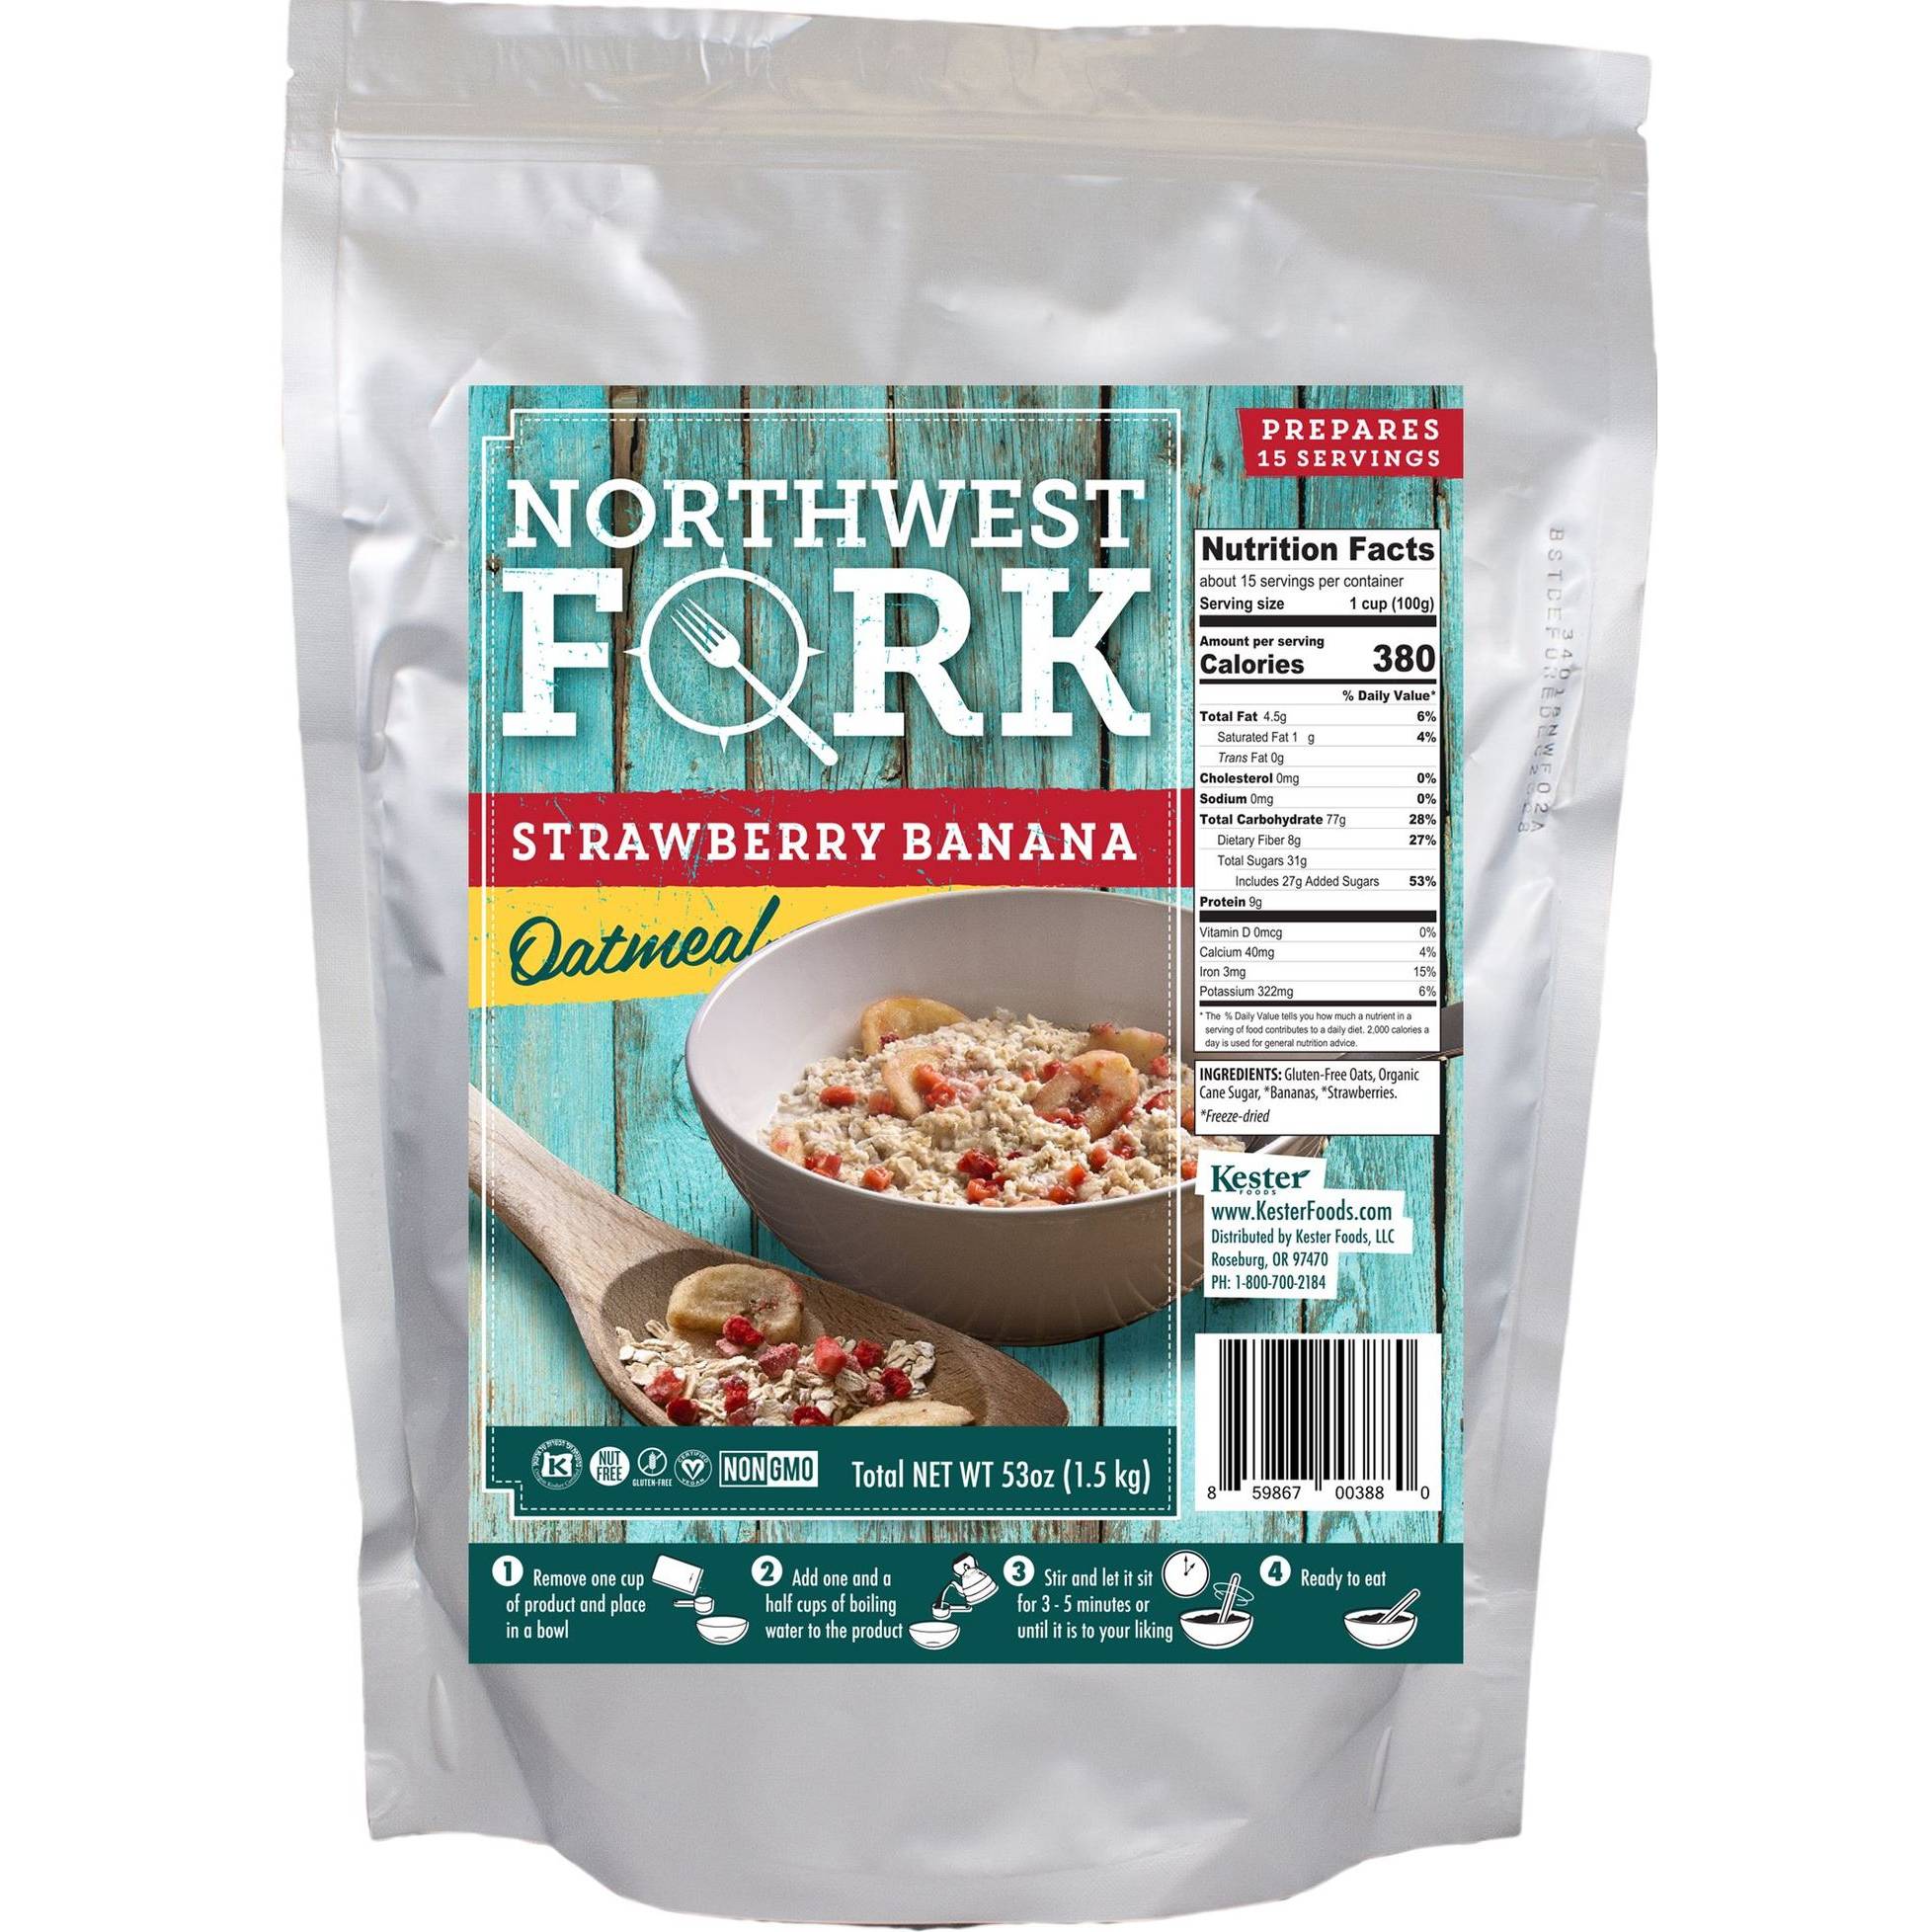 A bag of NorthWest Strawberry Banana Oatmeal - Non-GMO, Gluten-Free, Kosher, and Vegan - 15 Servings - (SHIPS IN 1-3 WEEKS).